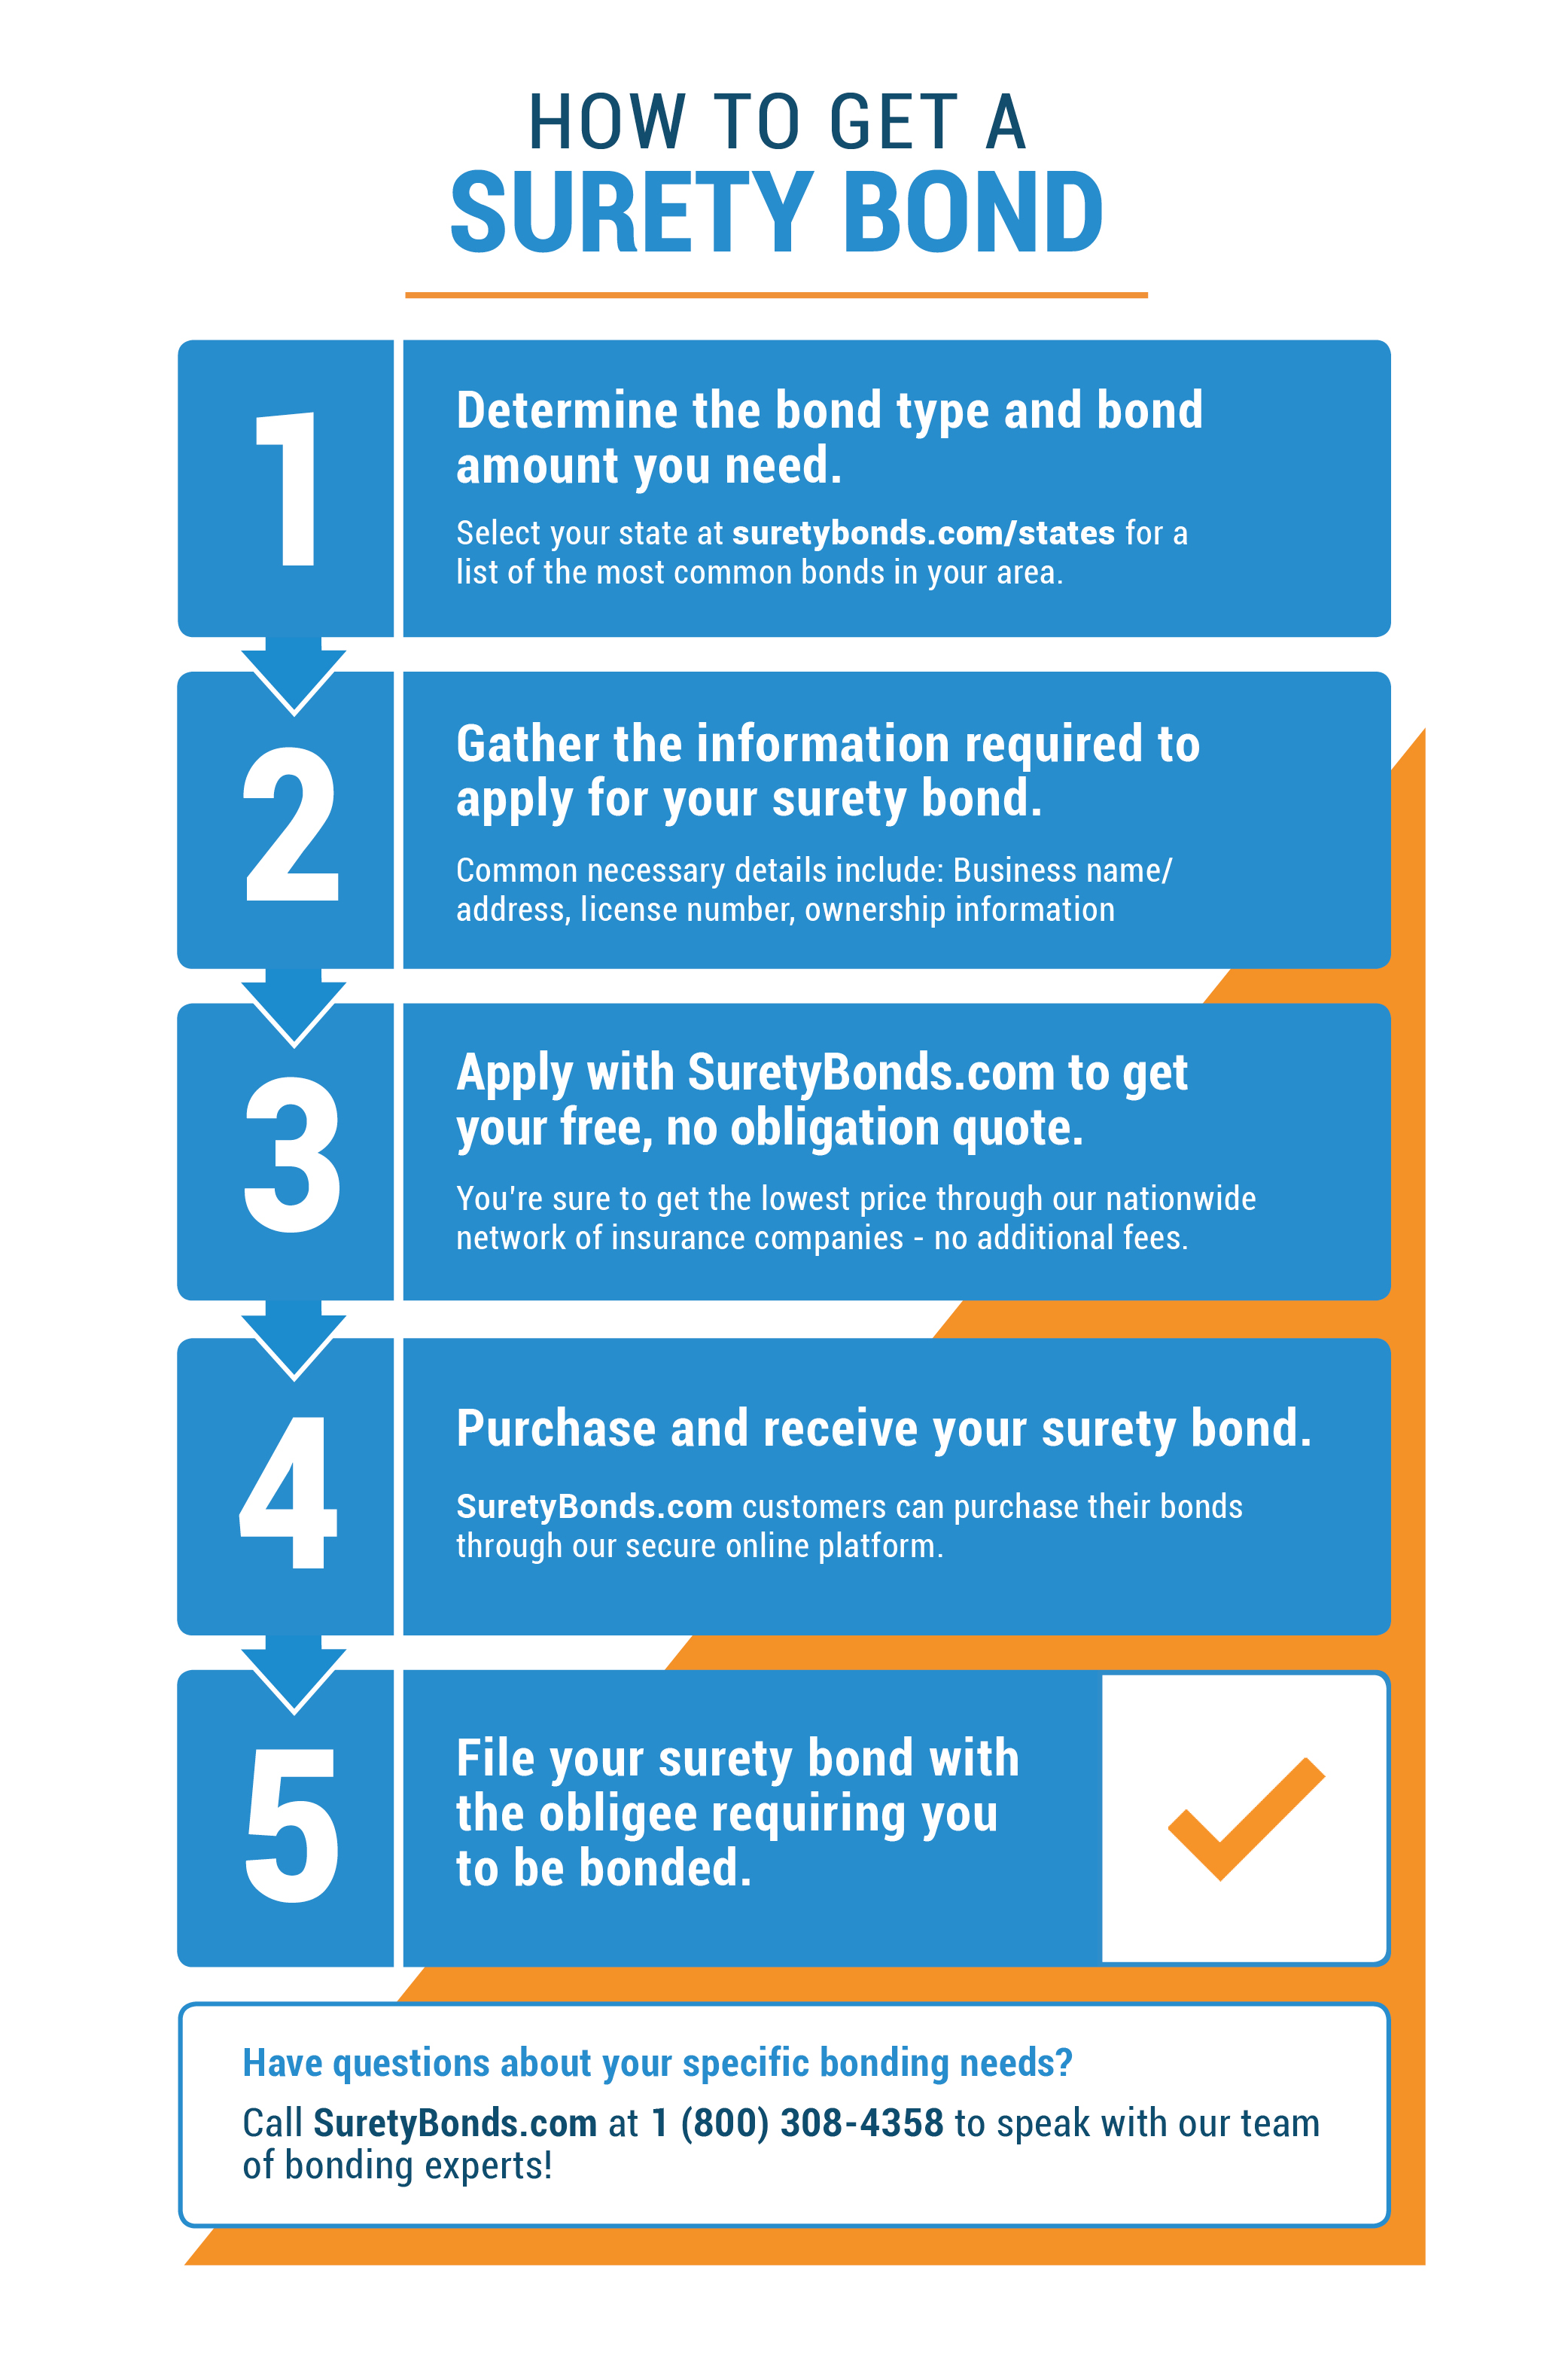 Step 1: Determine the bond type and amount needed, 2: gather your information for the bond application, 3: apply for a free quote with SuretyBonds.com, 4: purchase and receive your surety bond, 5: file the bond with your obligee